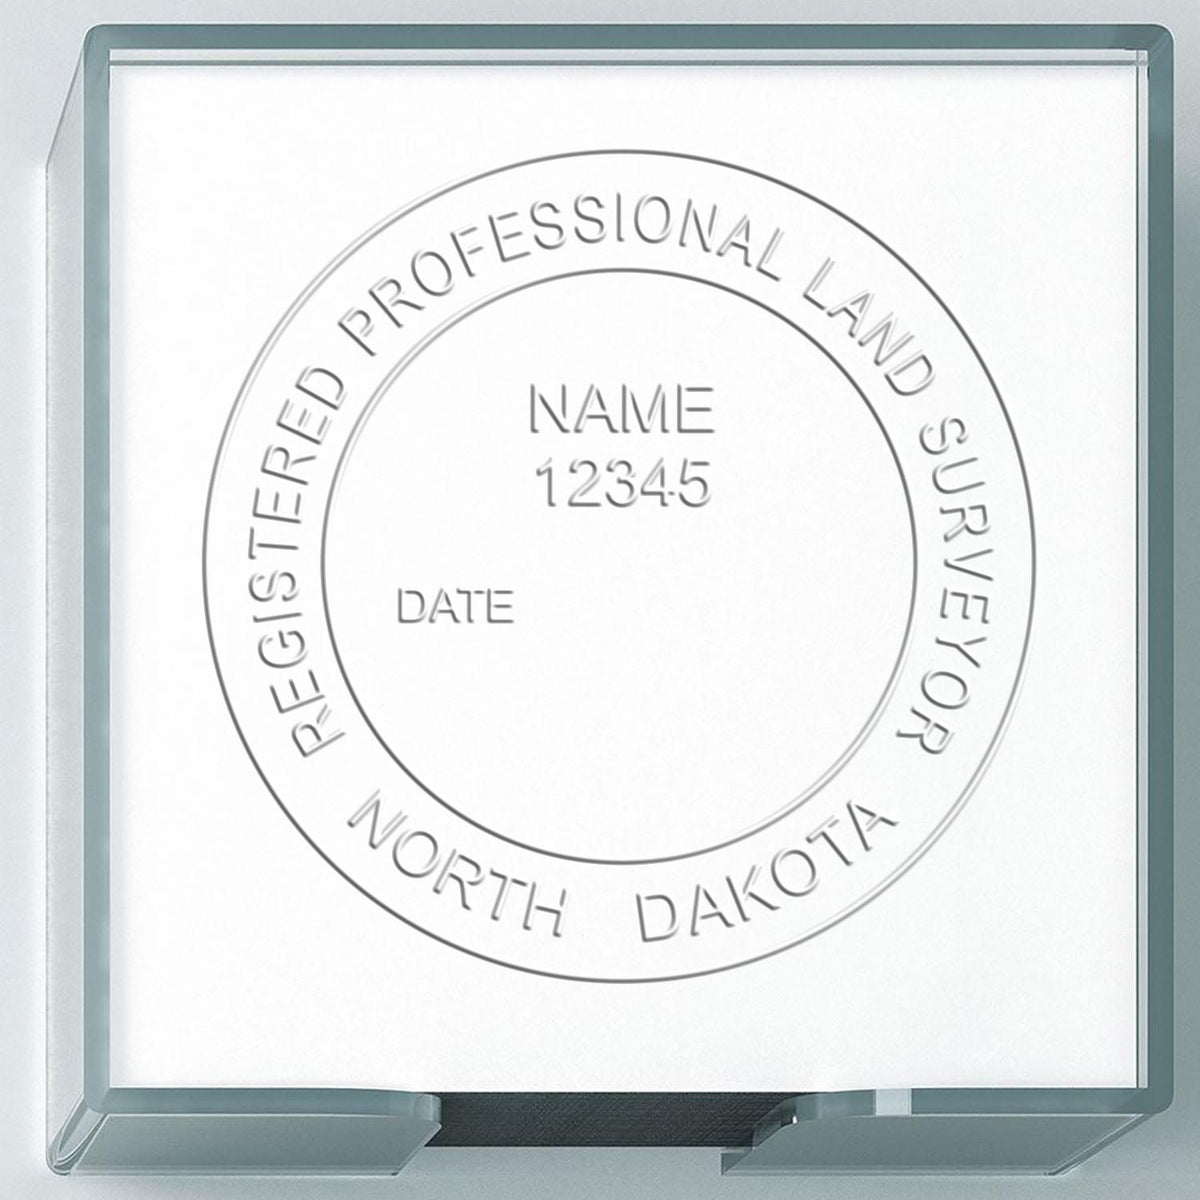 A lifestyle photo showing a stamped image of the State of North Dakota Soft Land Surveyor Embossing Seal on a piece of paper